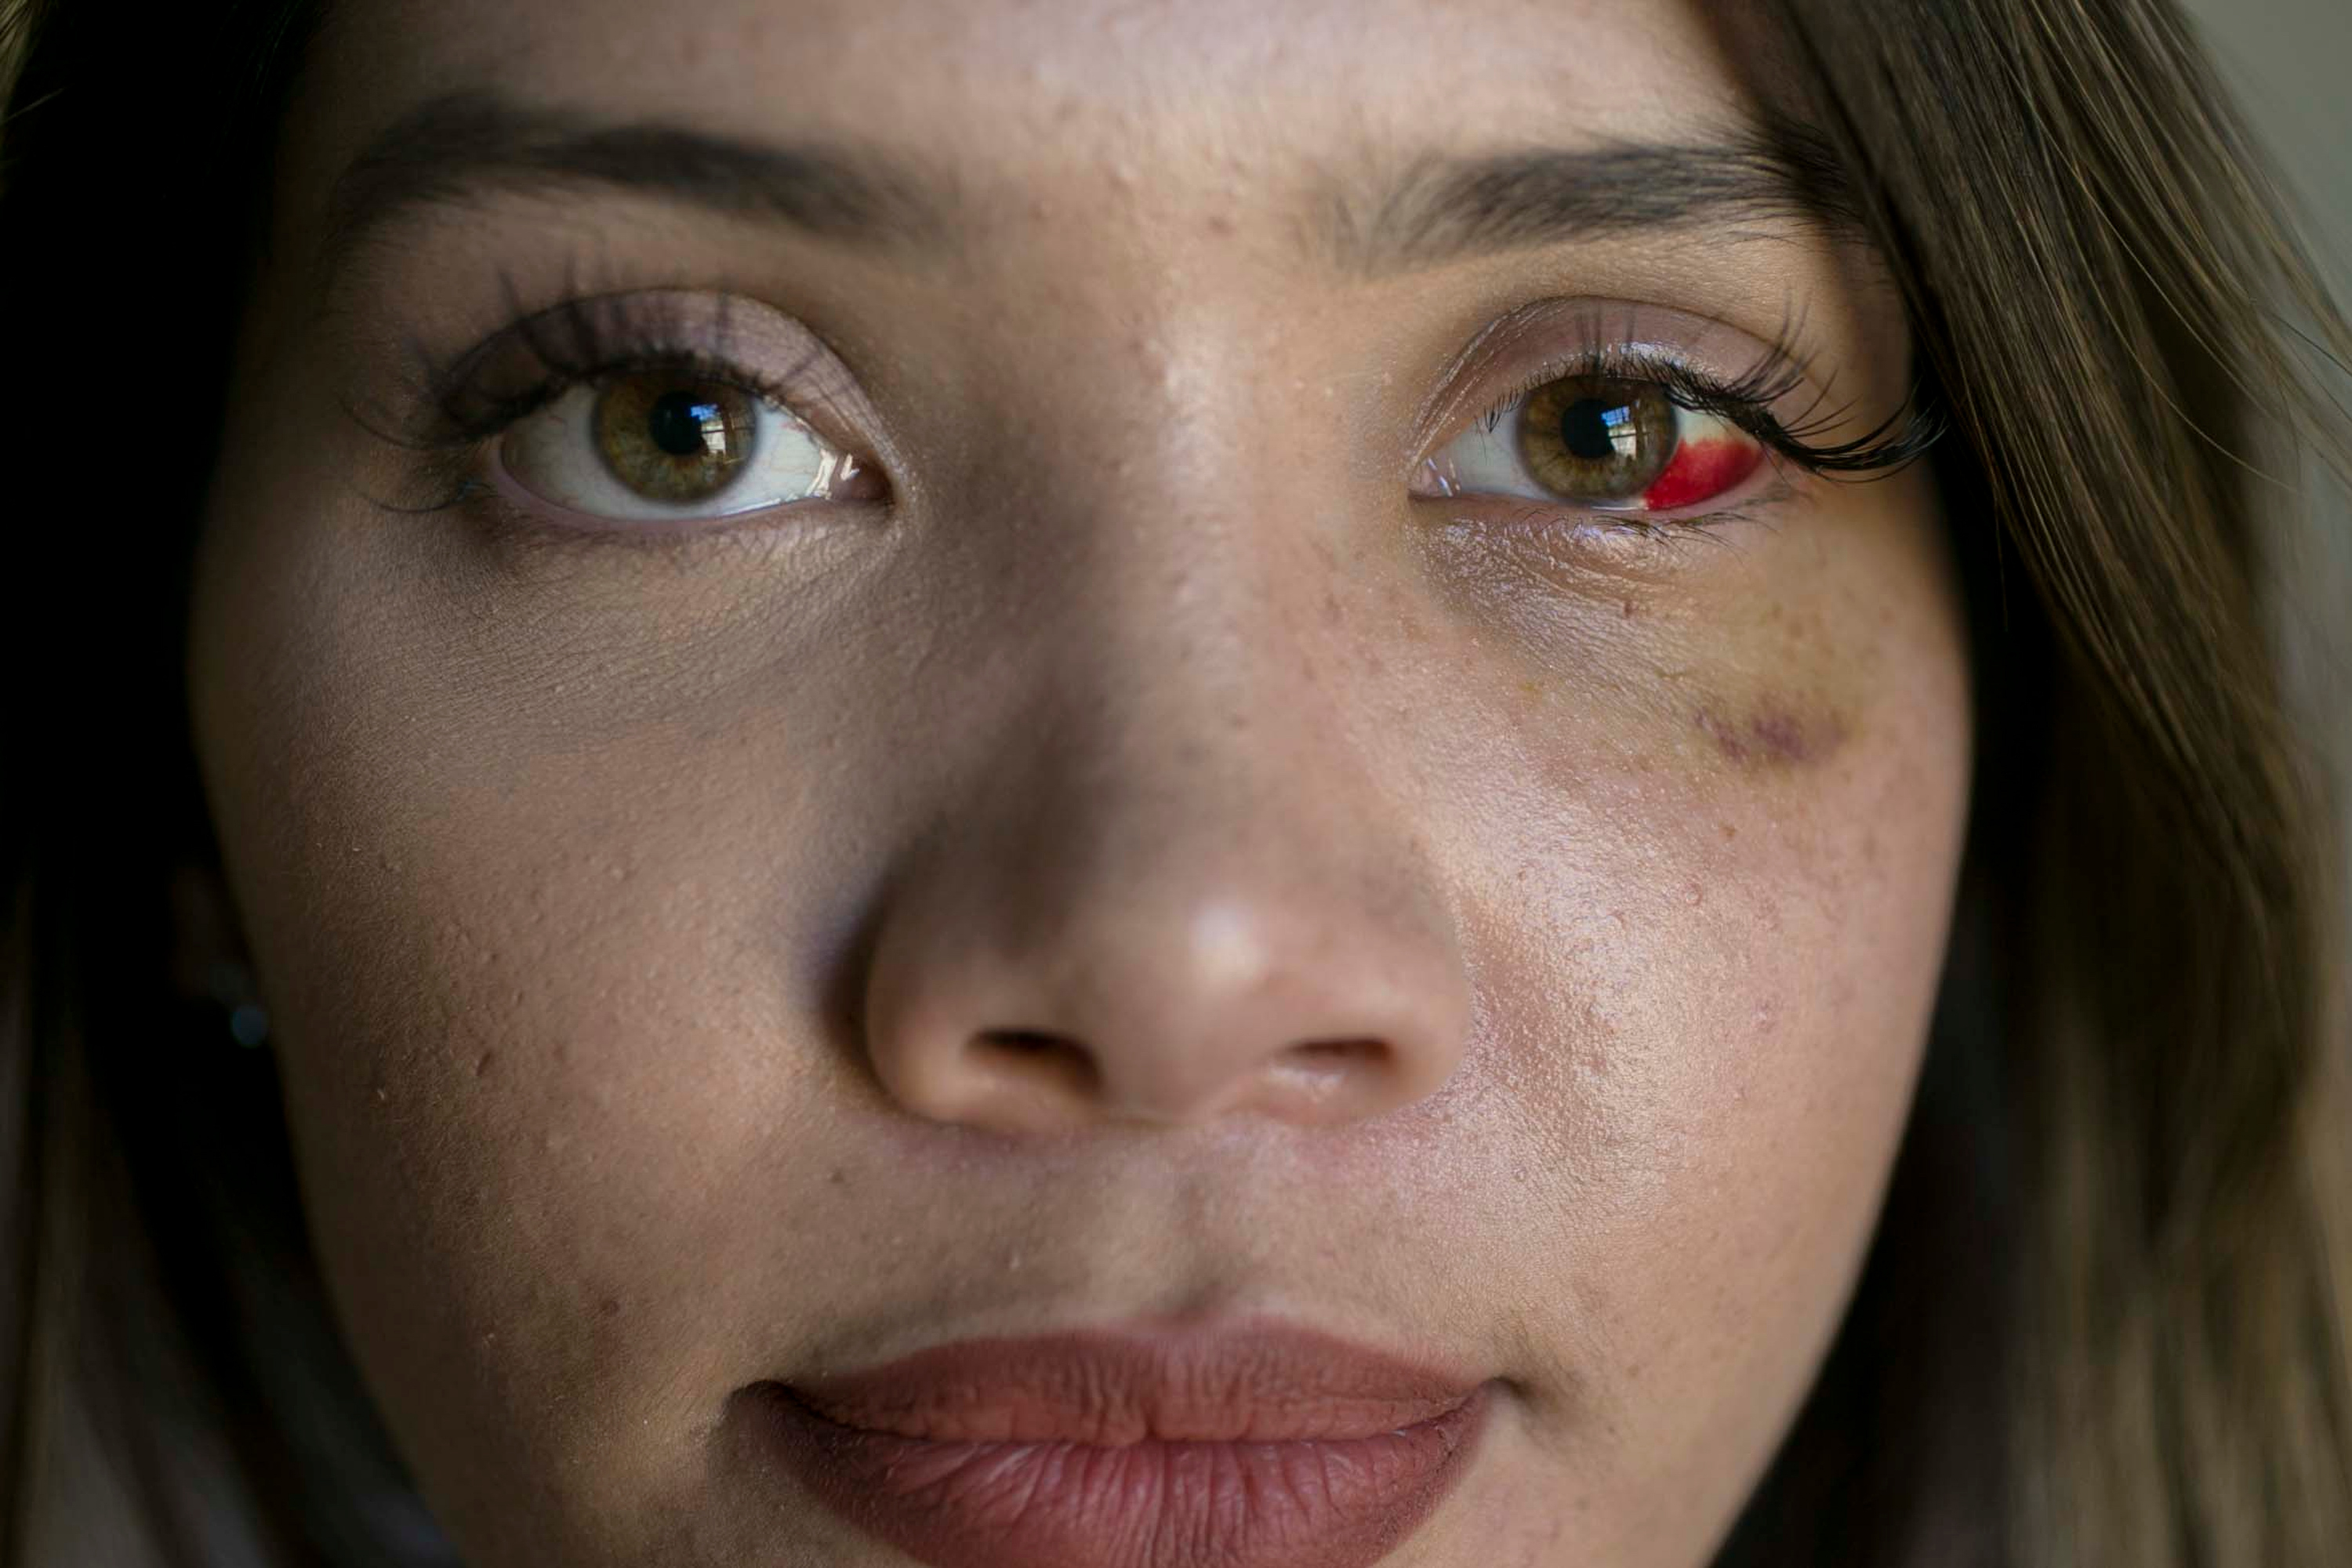 A portrait shot of a woman's face who has blood in one of her eyes.